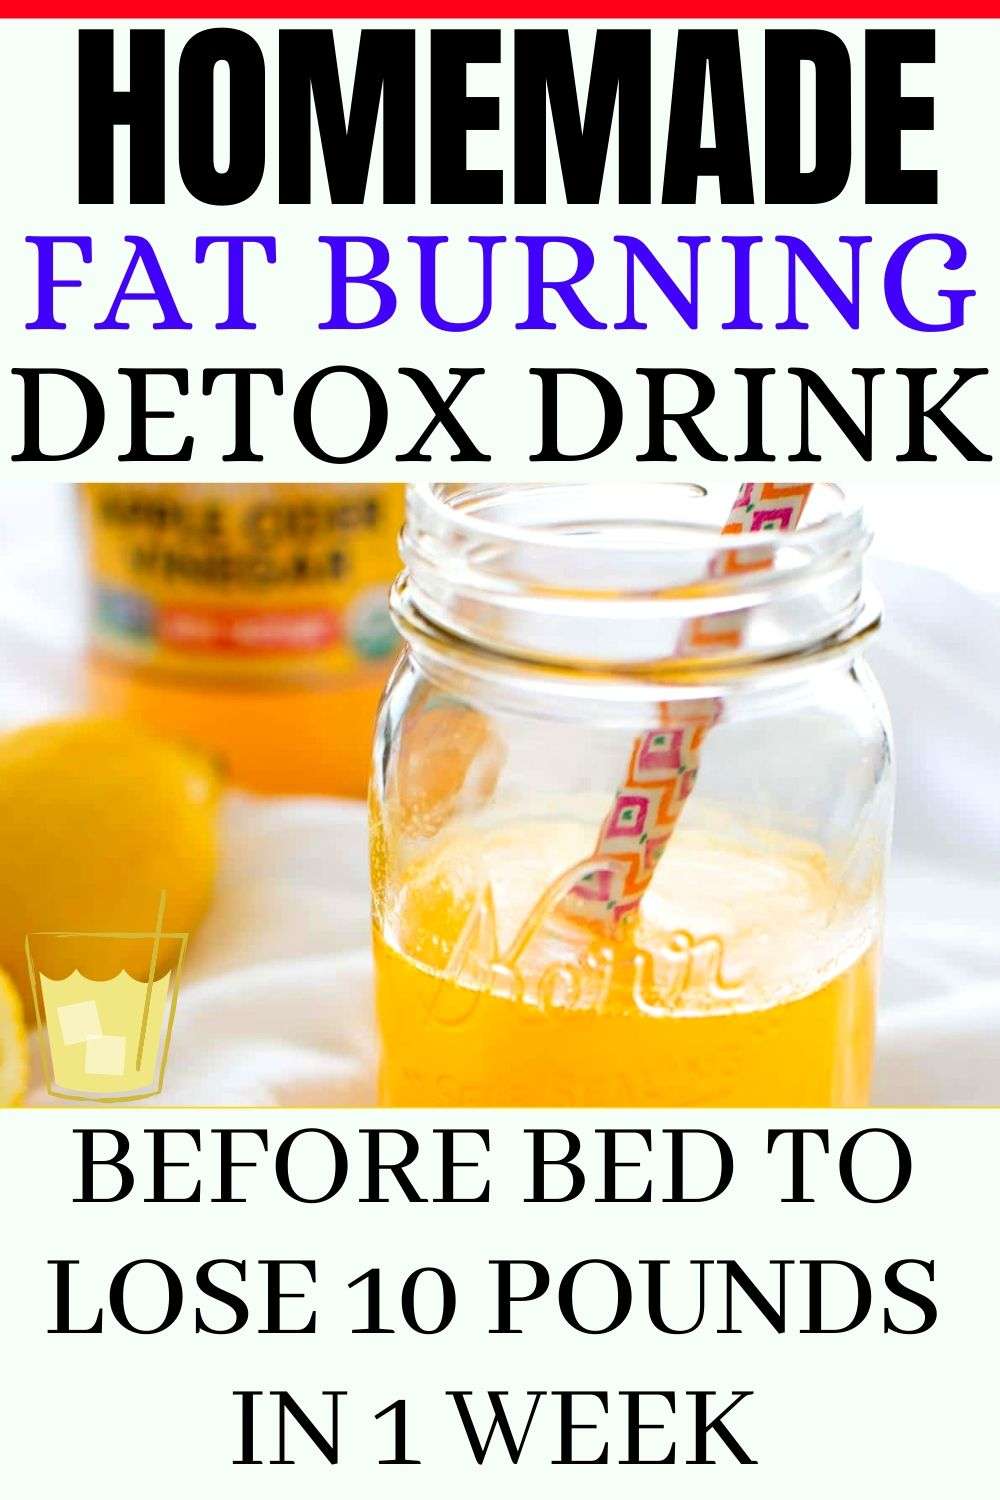 Fat Burning Detox Drink Before Bed To Lose 10 Pounds In 1 ...